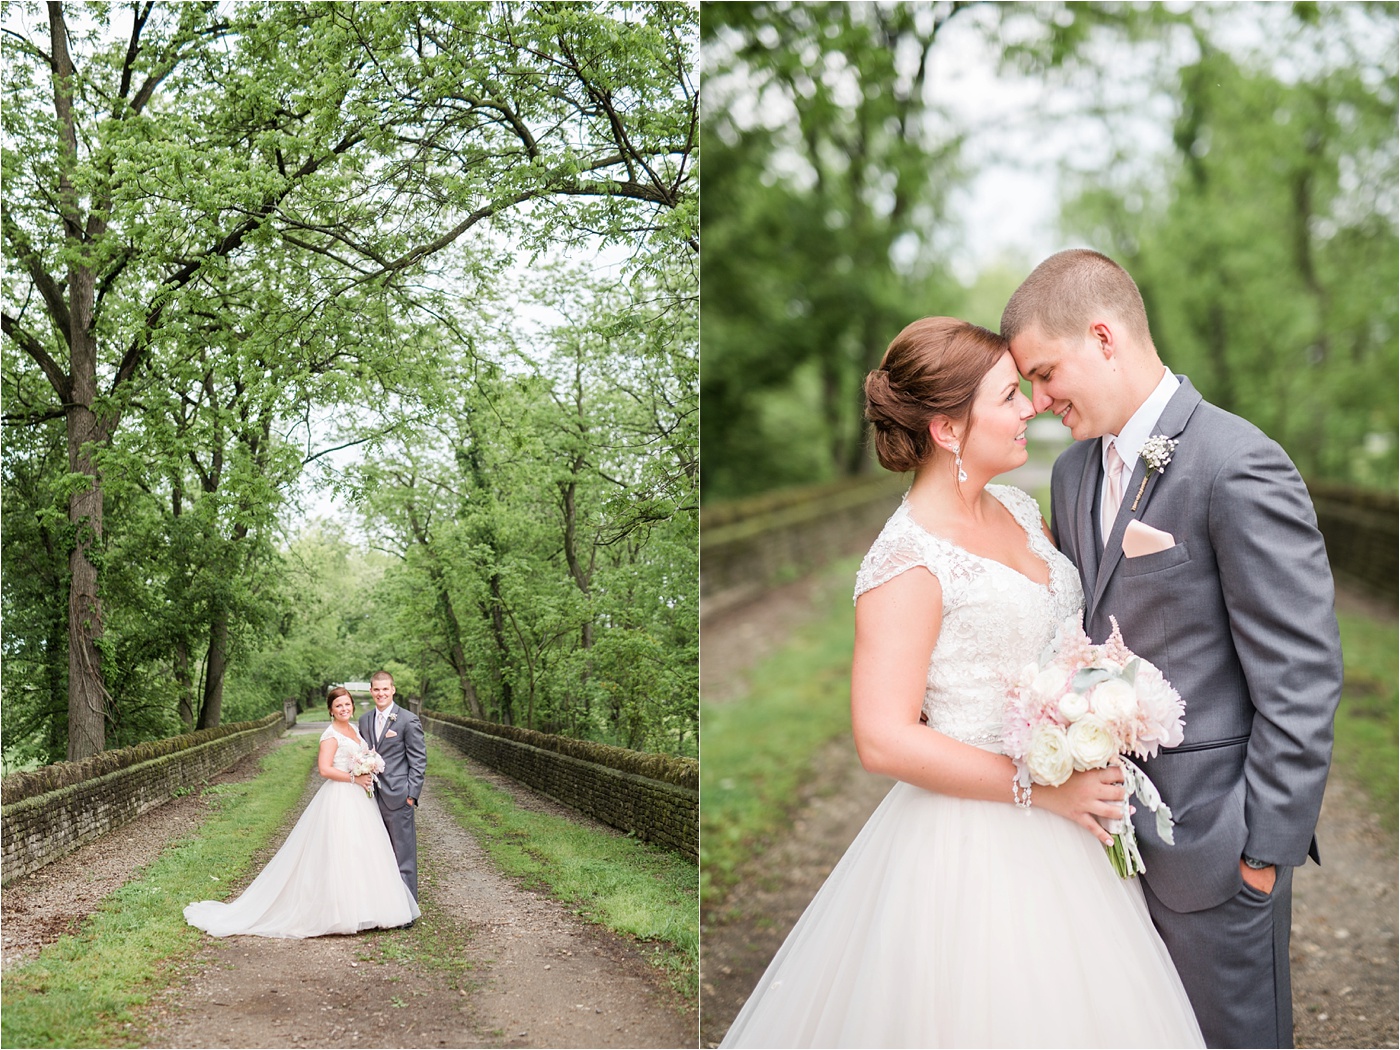 A Blush Outdoor wedding at Irongate Equestrian | KariMe Photography_0109